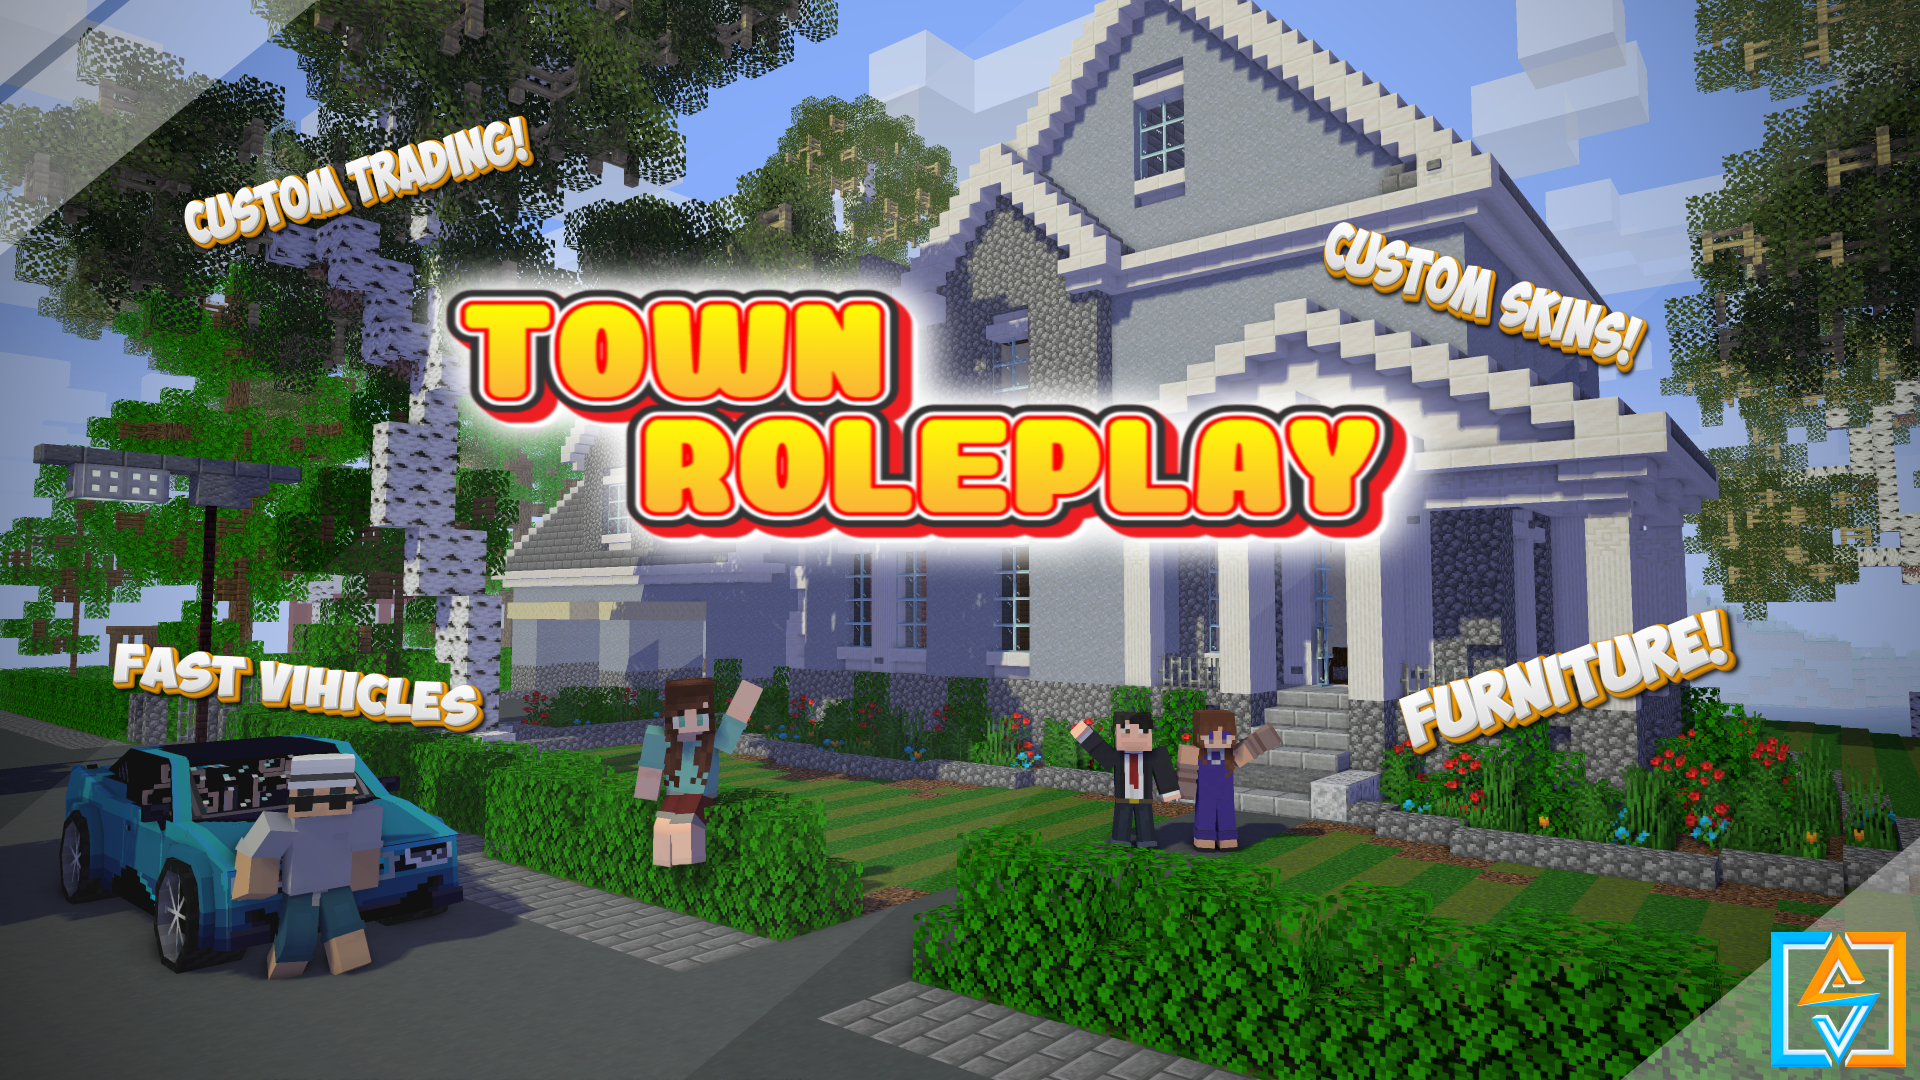 TOWN ROLEPLAY